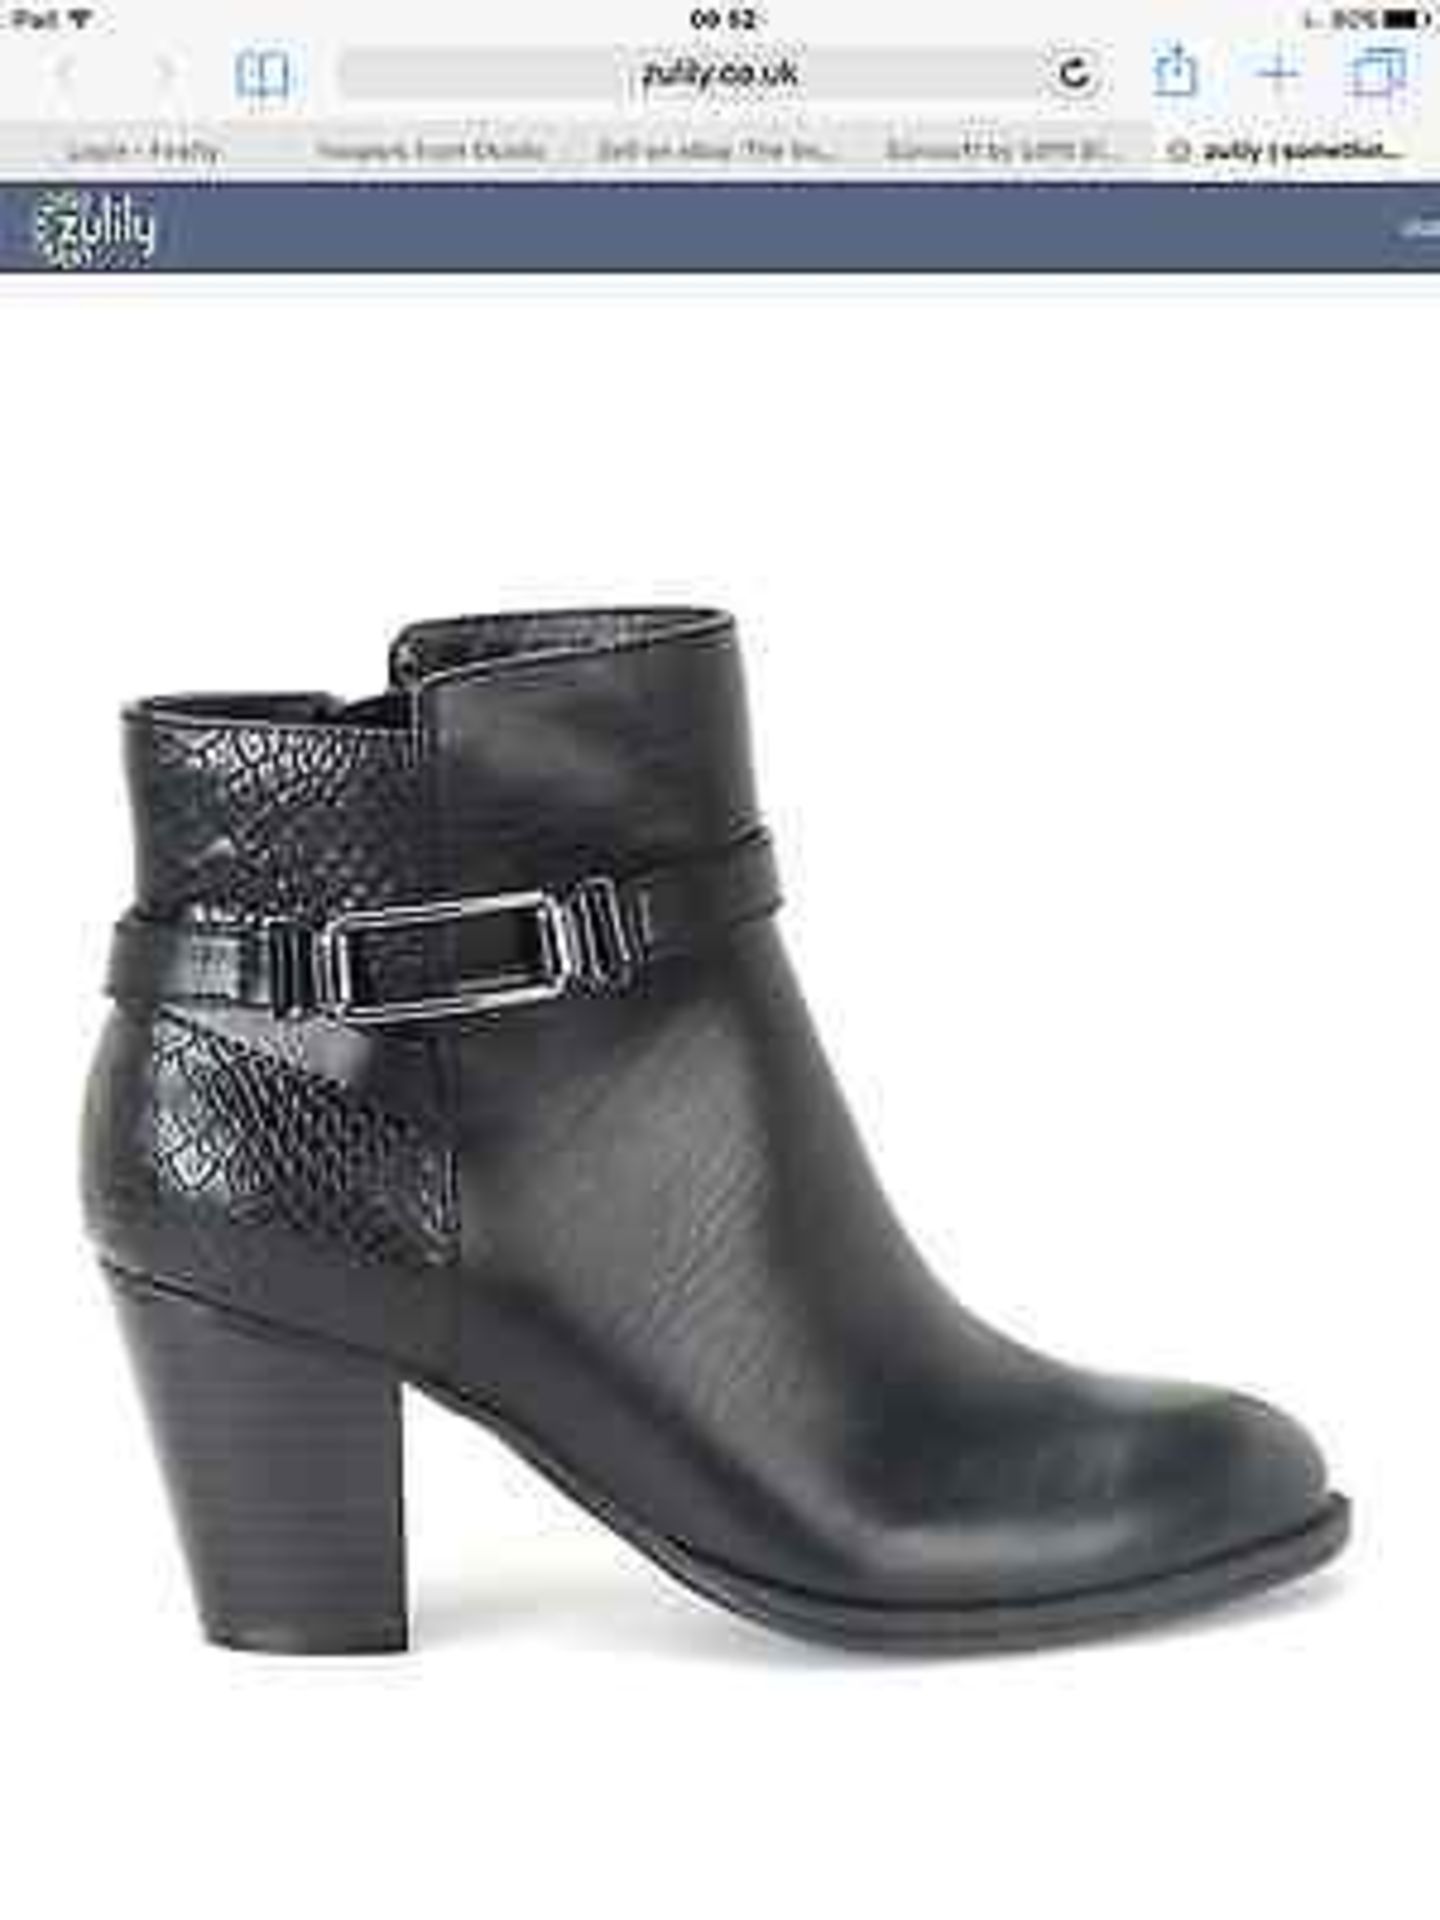 Euro Soft Black Sigourney Ankle Boot, Size EUR 38 (New with box) - Image 4 of 5